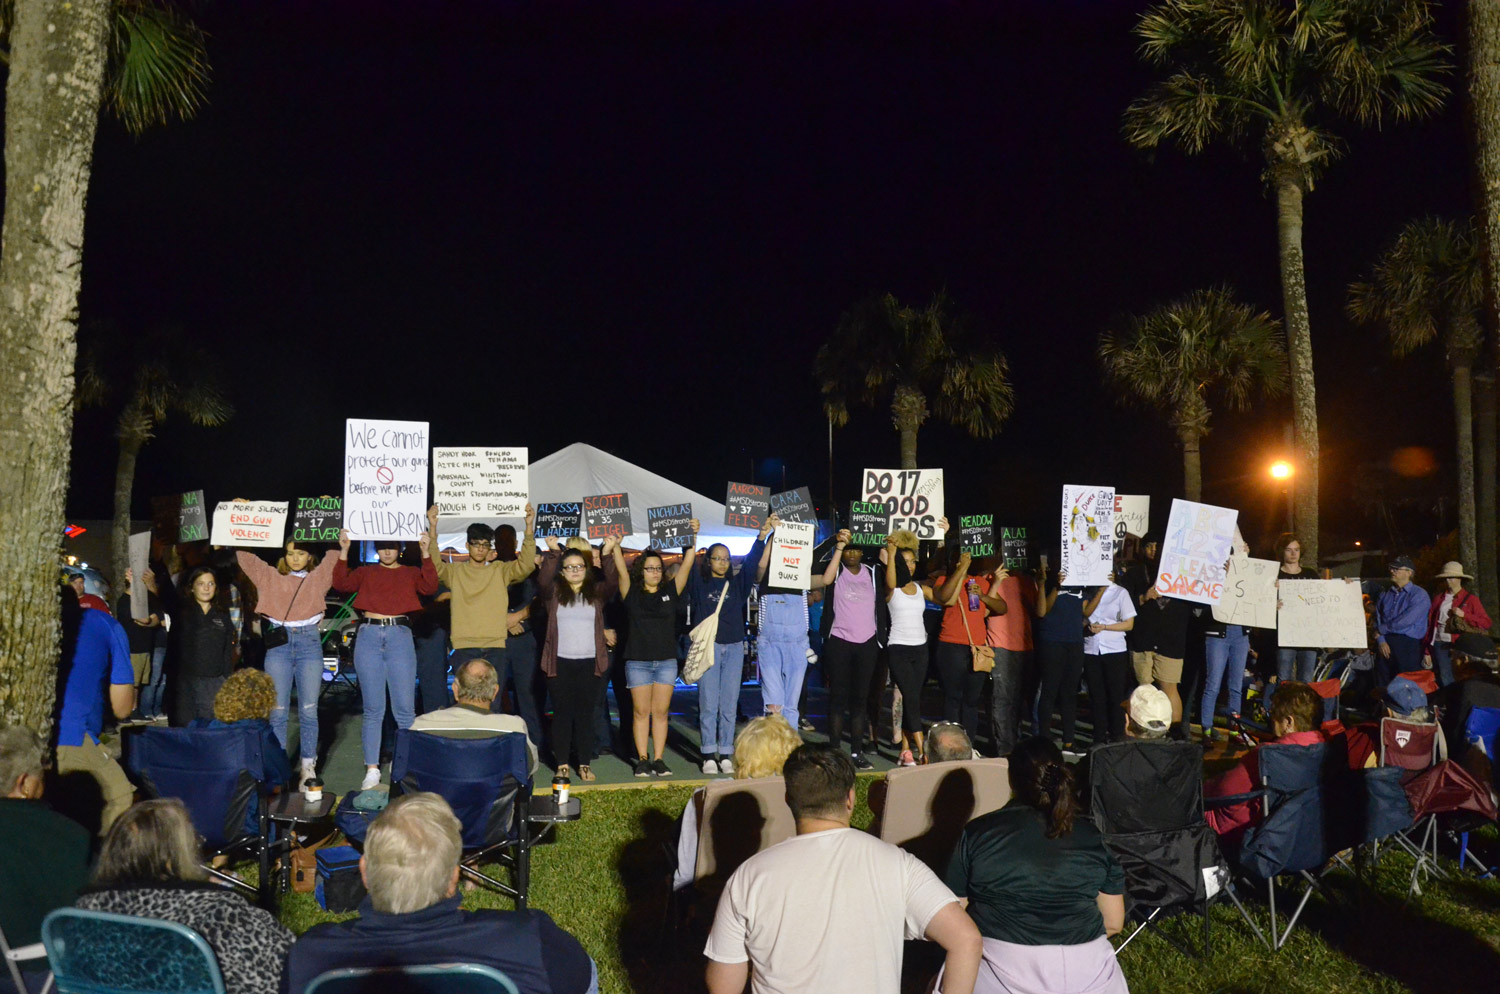 The students' march ended at Veterans Park during First Friday, where the names of the 17 victims of the Parkland massacre were read out loud as students held signs of the the names of those killed. Click on the image for larger view. (© FlaglerLive)